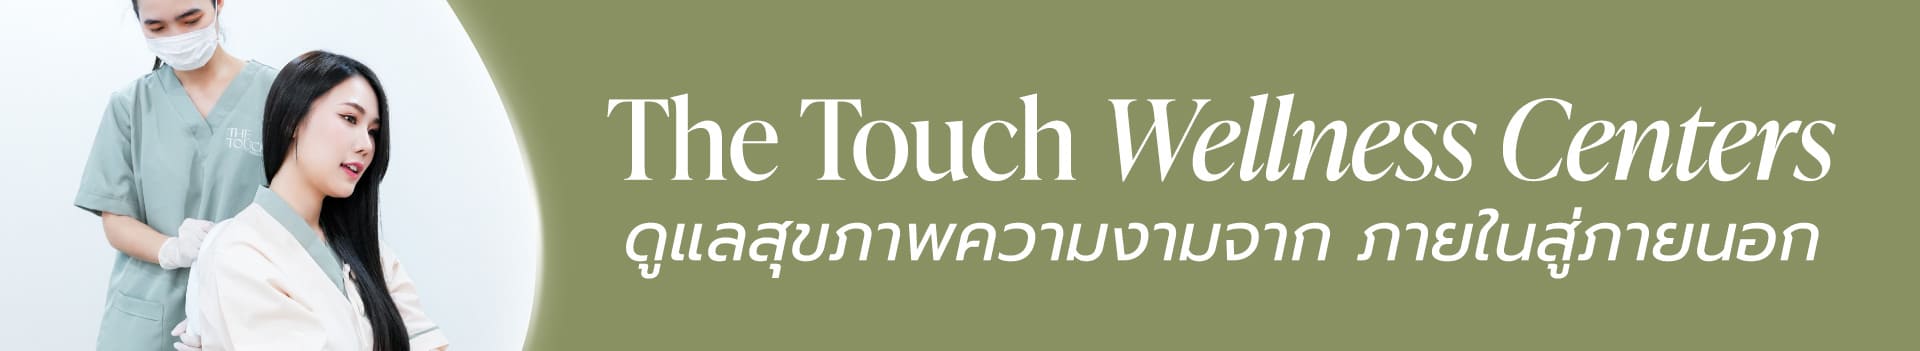 The Touch Wellness Centers